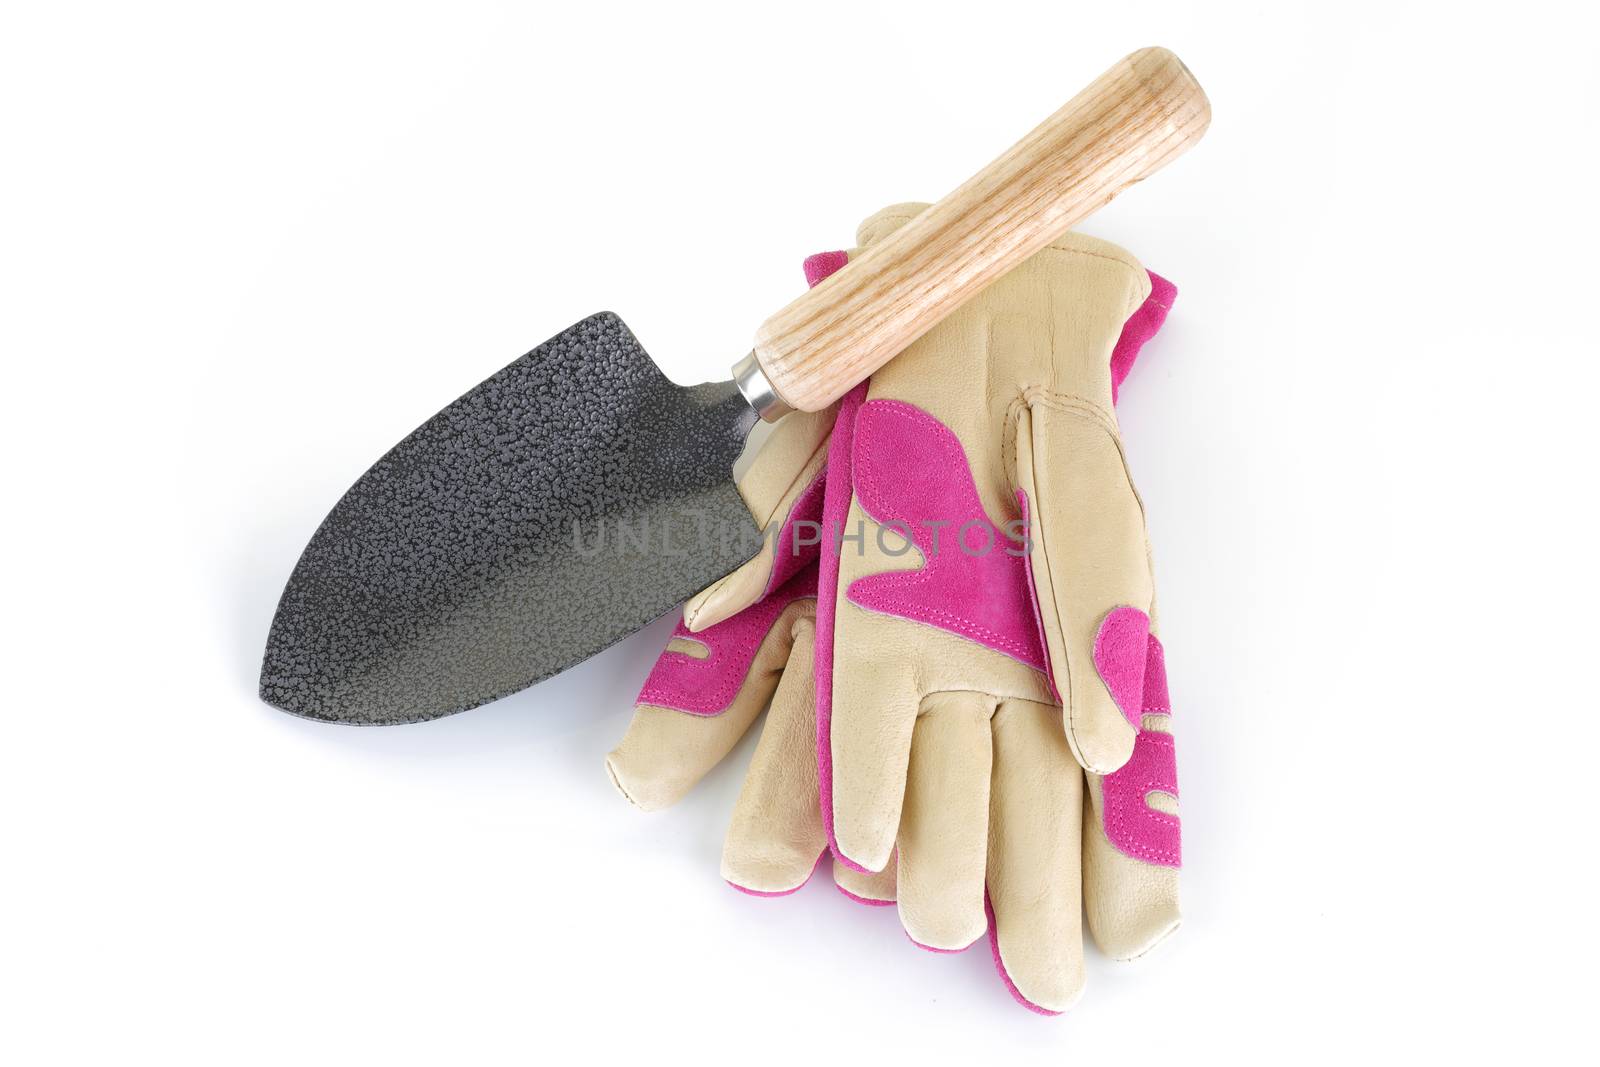 Ladies gloves and trowel for the garden by VivacityImages